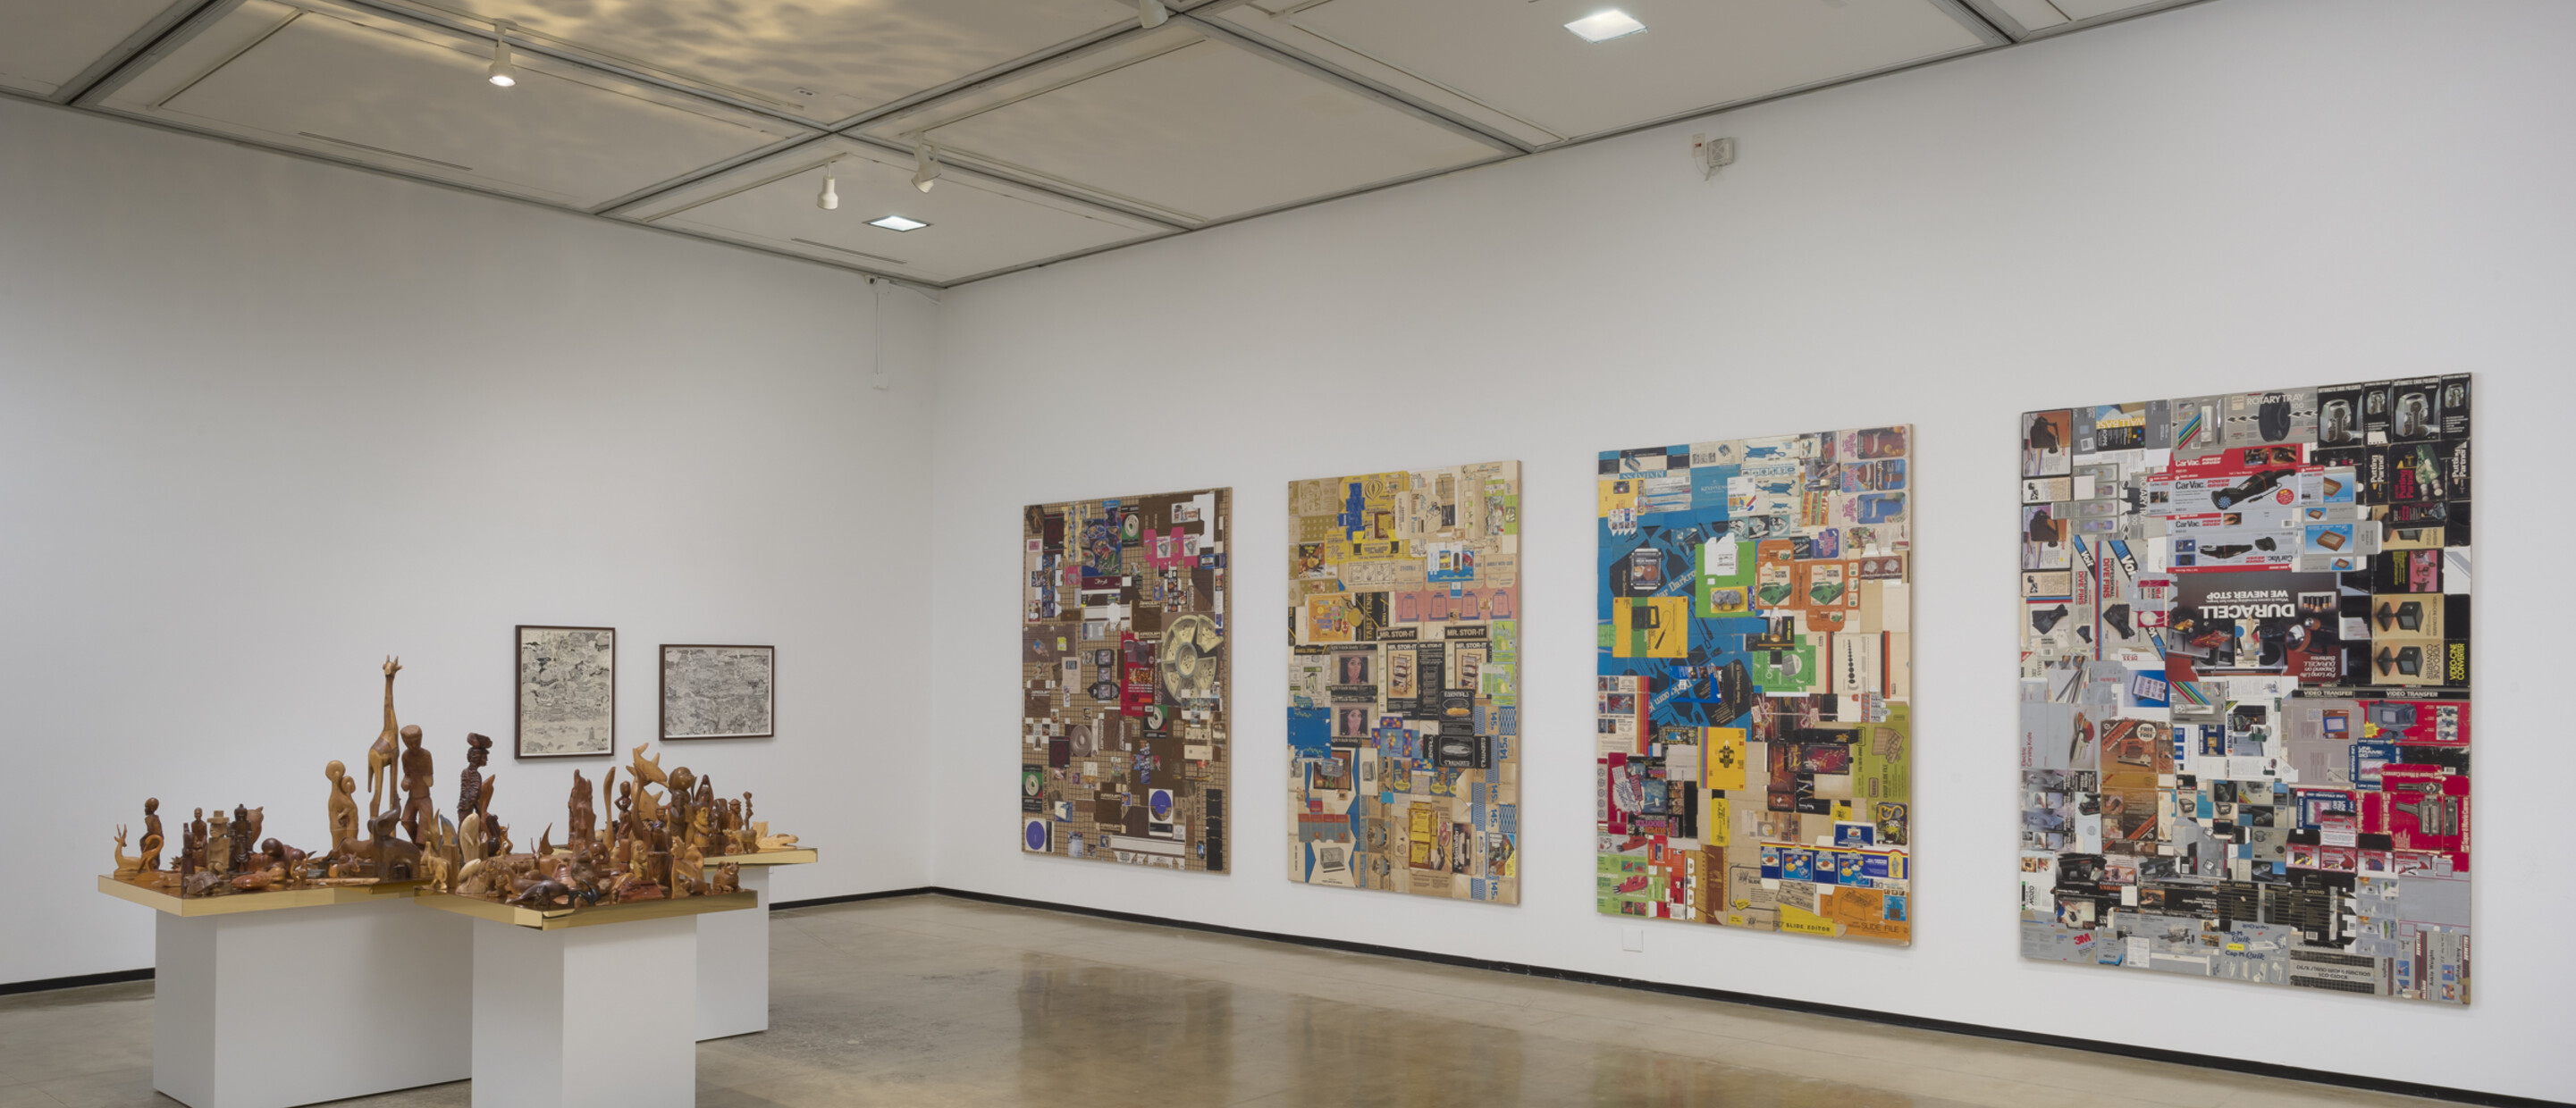 Installation view of R.S.V.P. Los Angeles with 4 multi-media works on the wall and table with multiple wooden sculptures